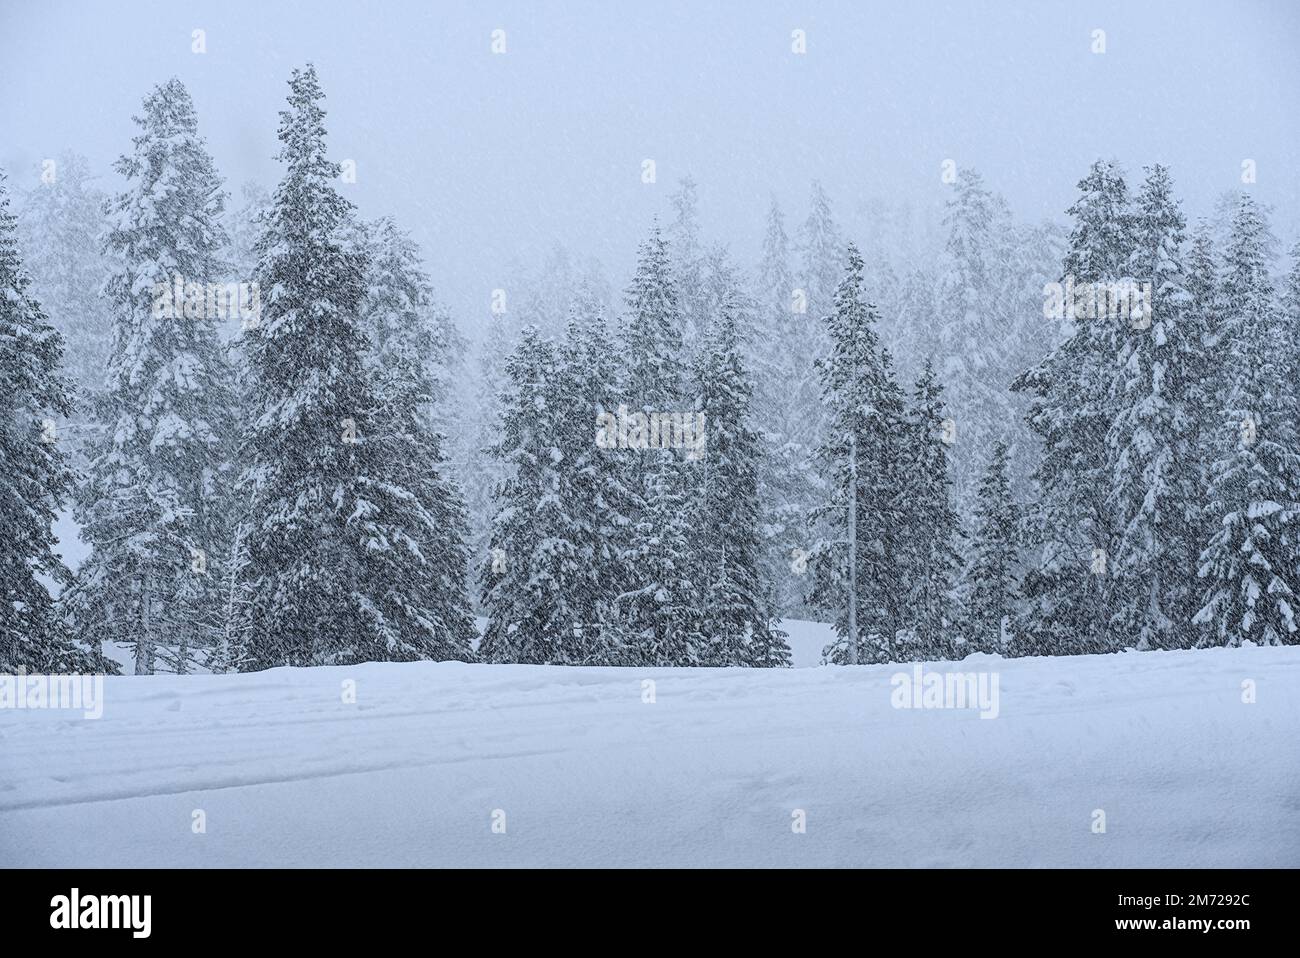 Alpine forest in a snowy day Stock Photo